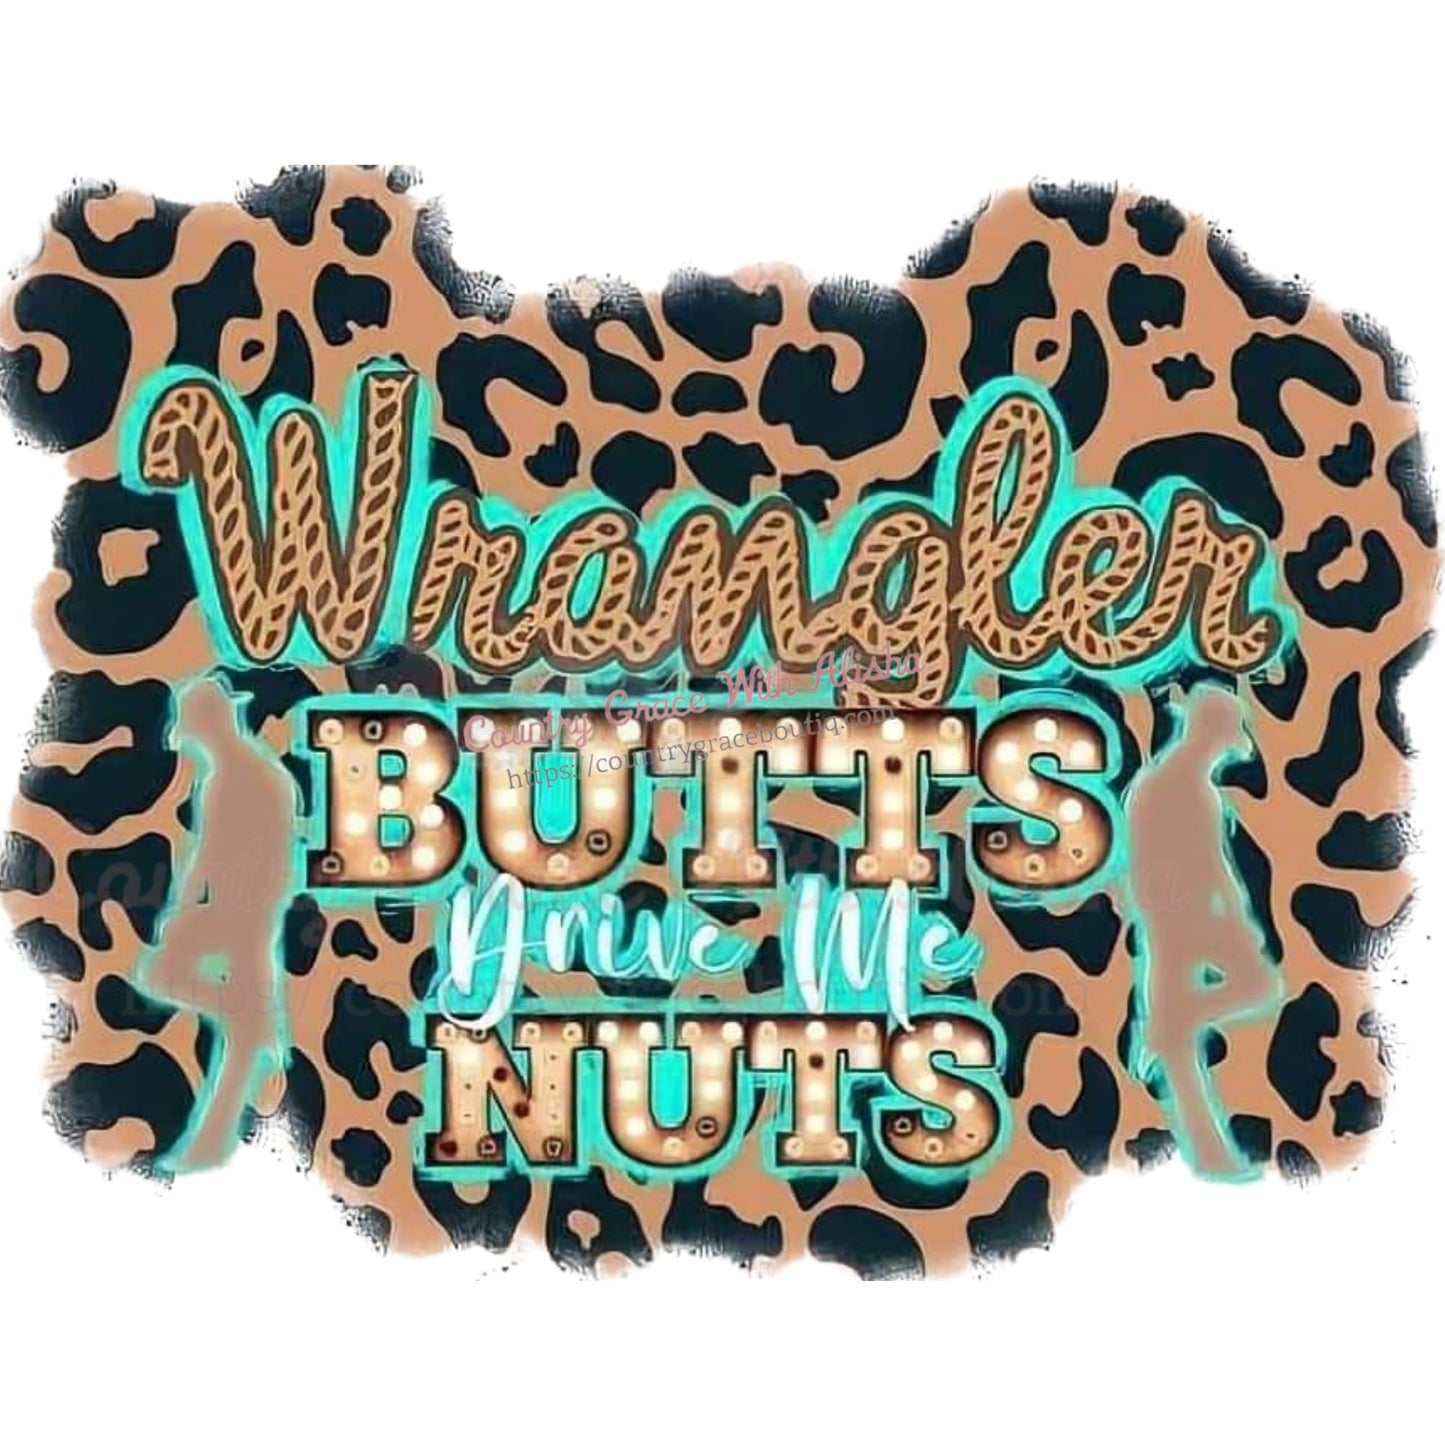 Wrangler Butts Sublimation Transfer - Sub $1.50 Country 